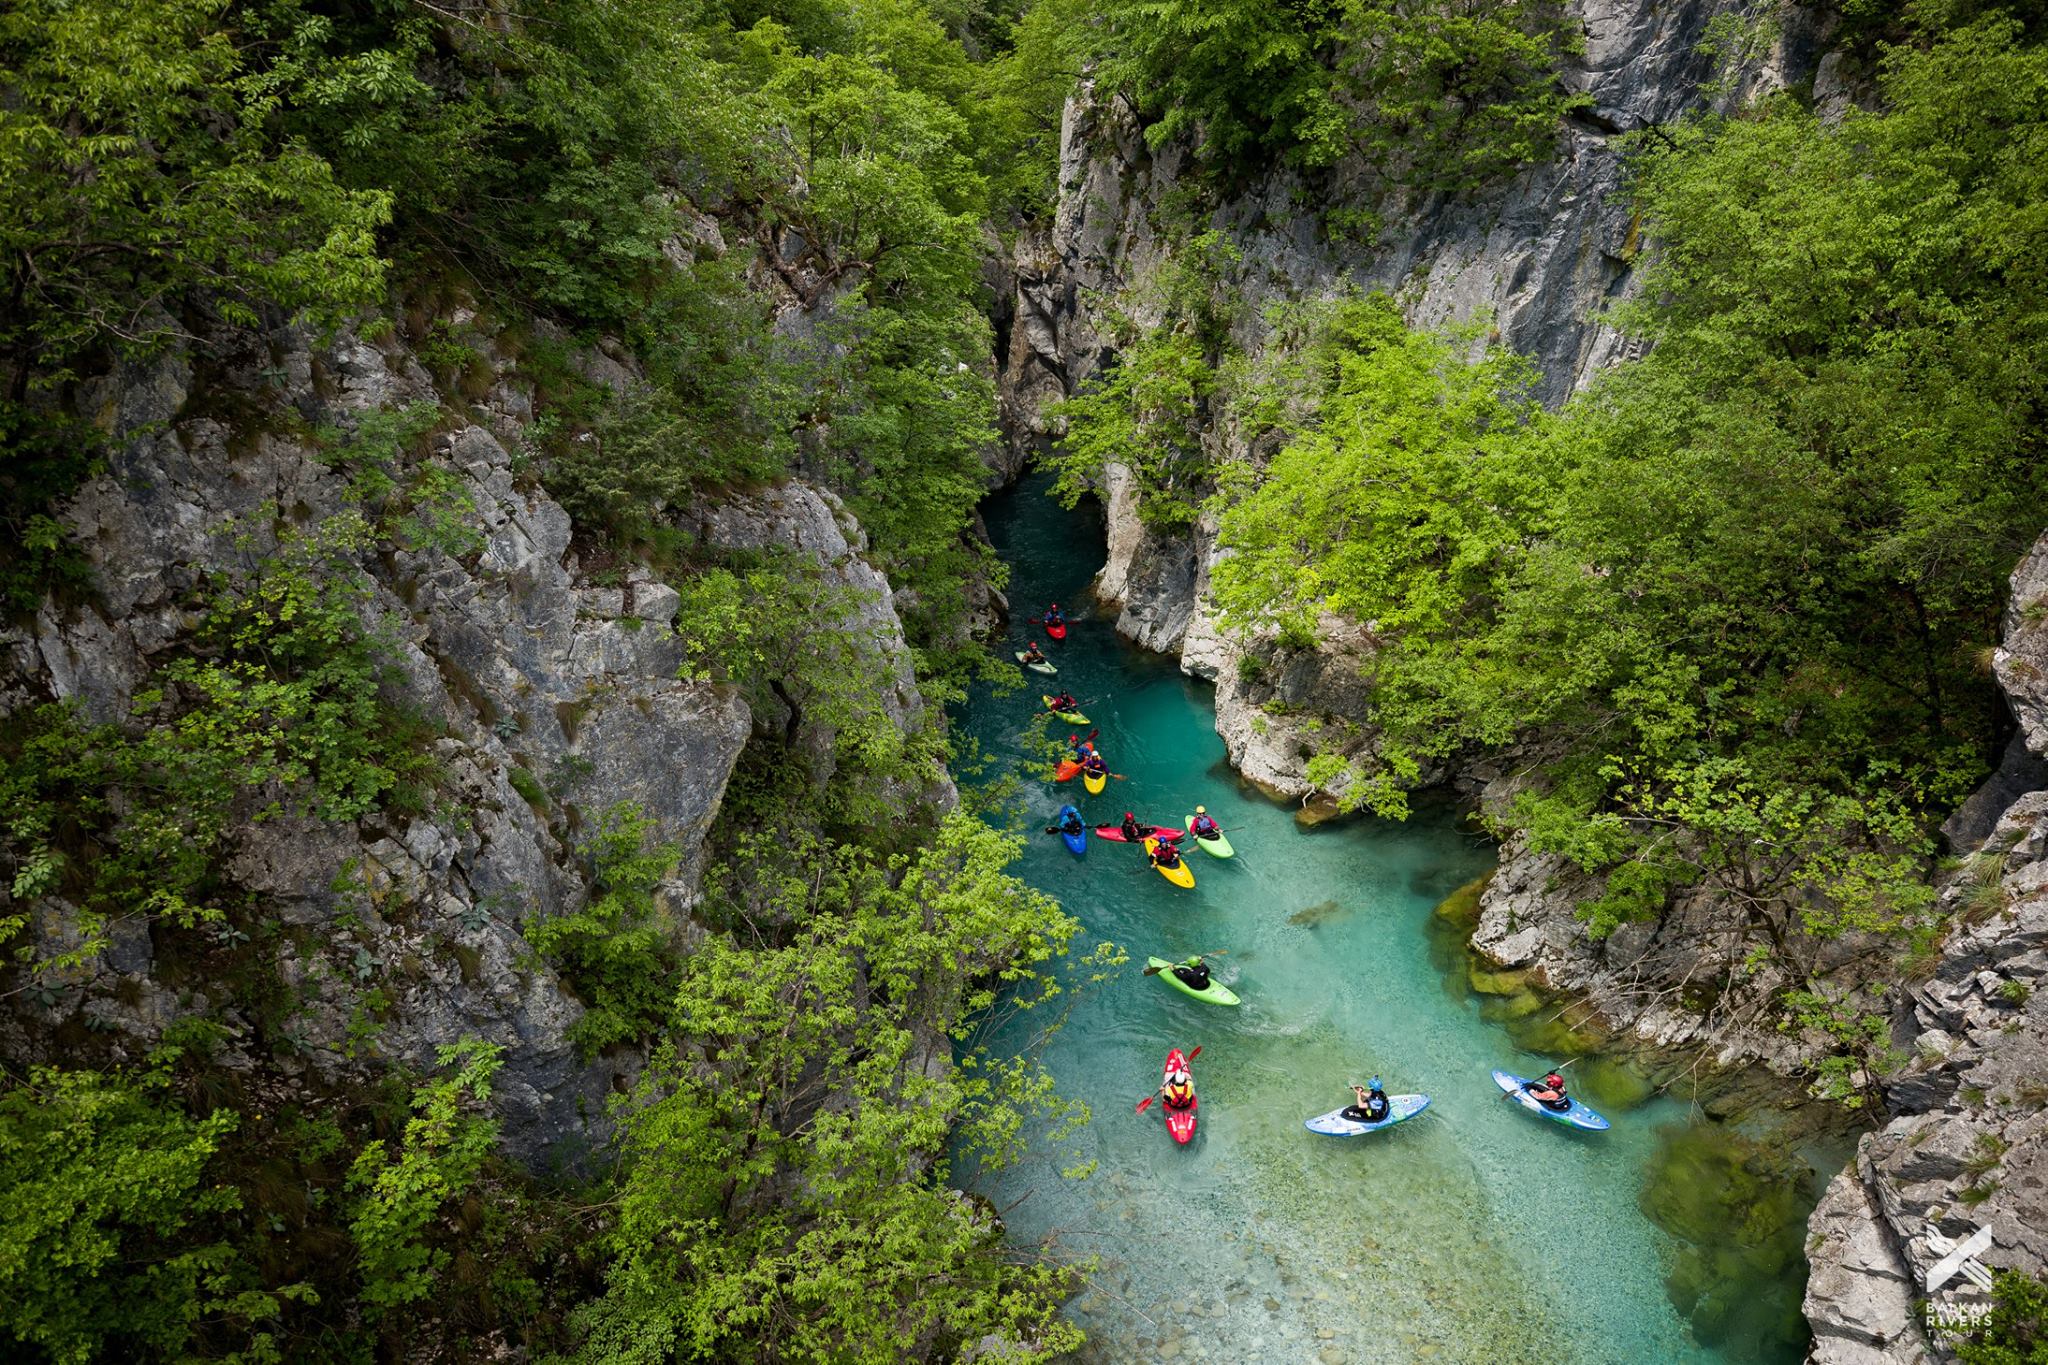 Valbona, Albania: even though this river is located inside a national park, hydropower projects on this river are in the pipeline. A total of 113 hydropower plants are projected to be built in national parks in the Balkans. © Jan Pirnat